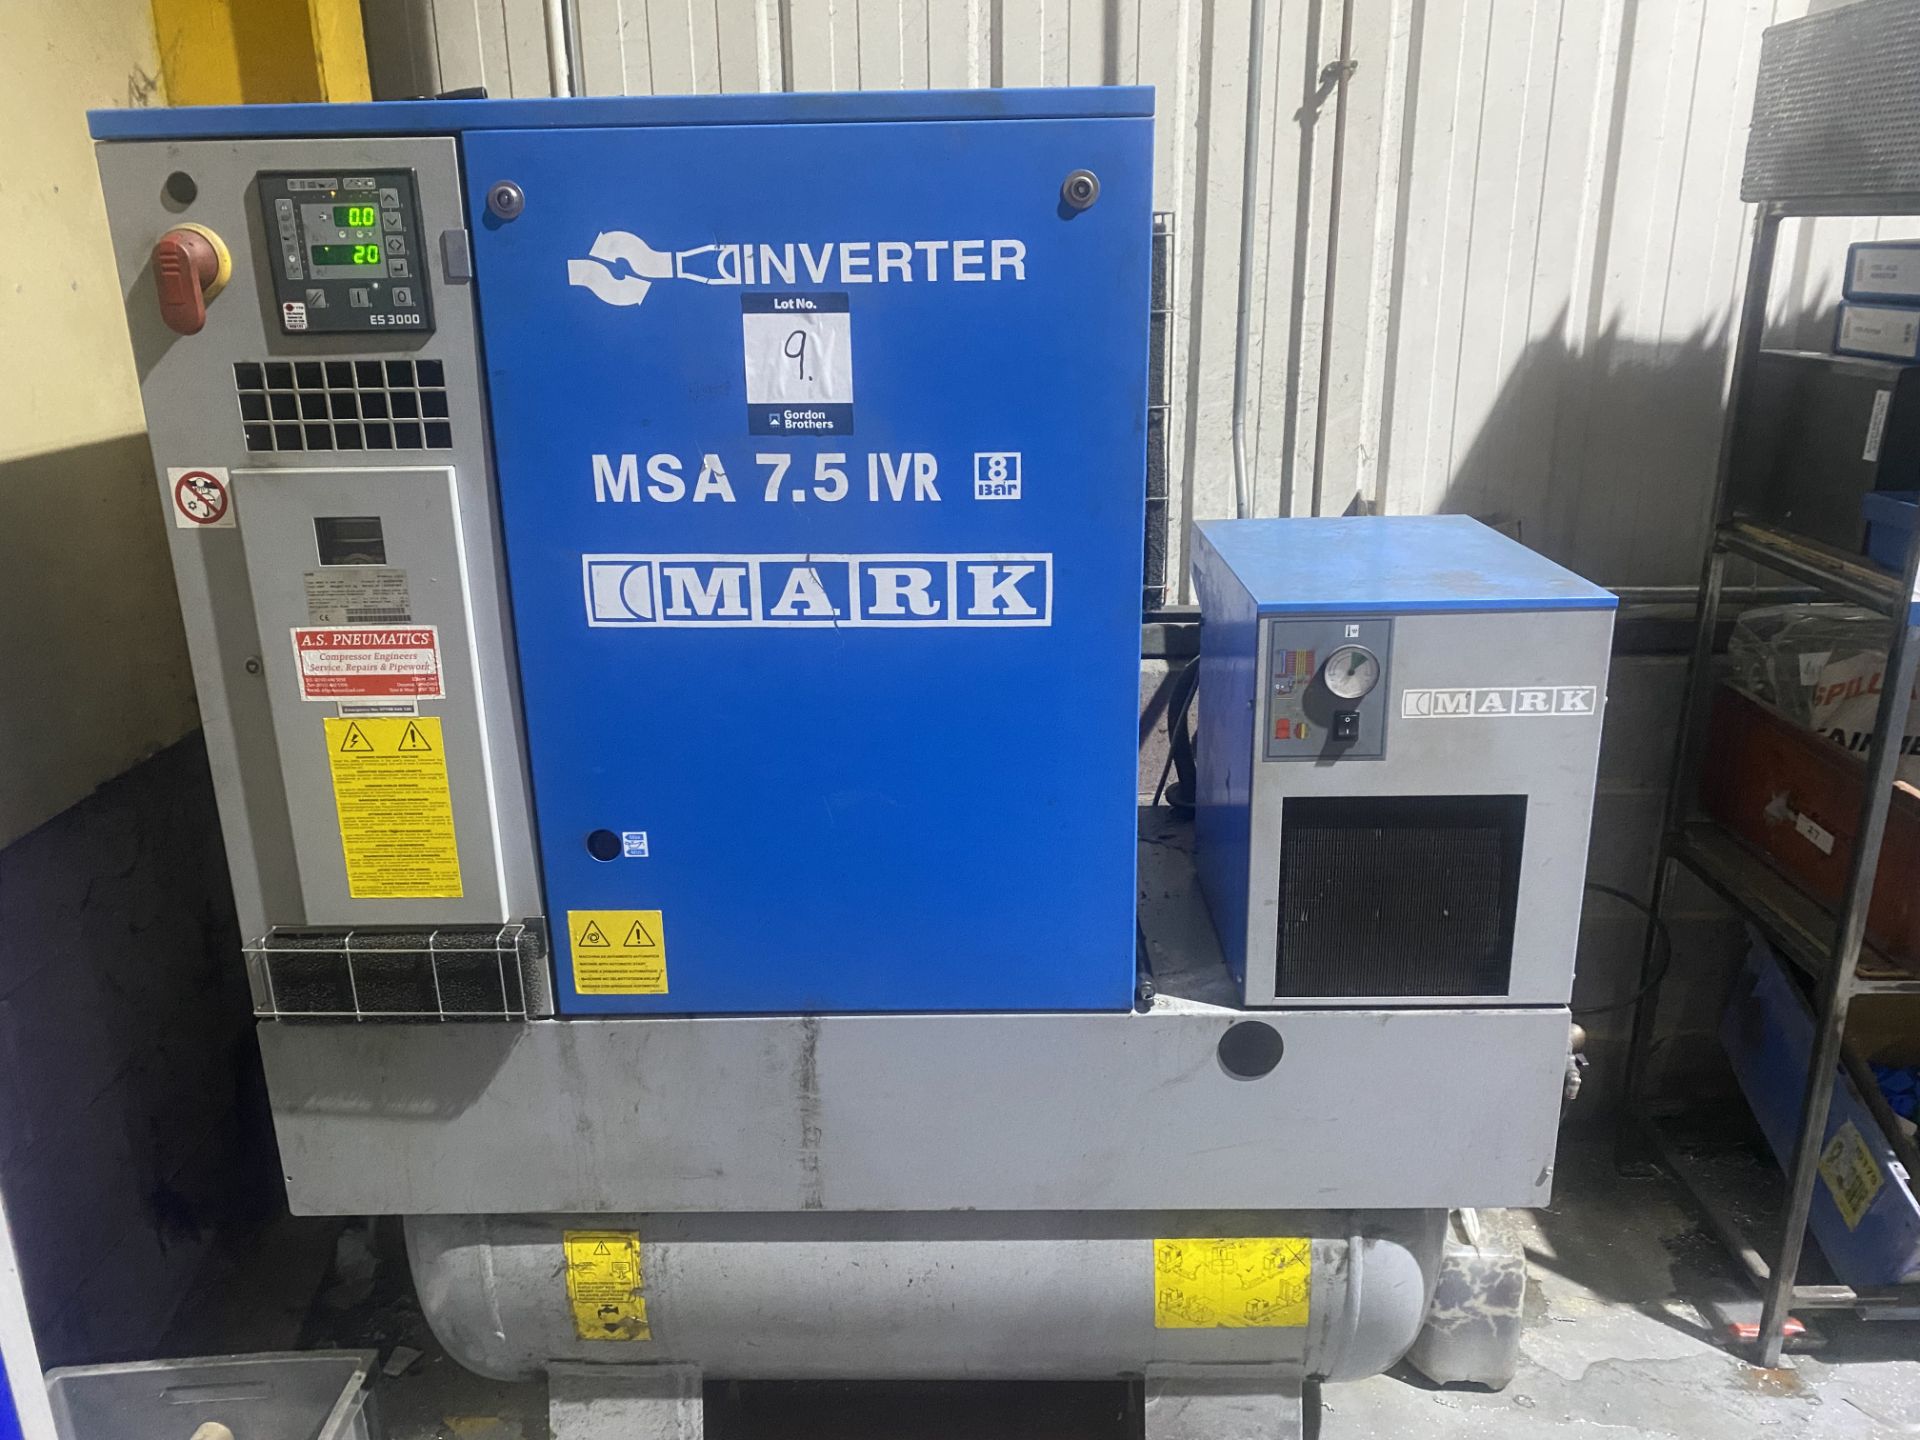 Mark reciever mounted air compressor, model 7.5 IVR inverter , 38000 recorded hours